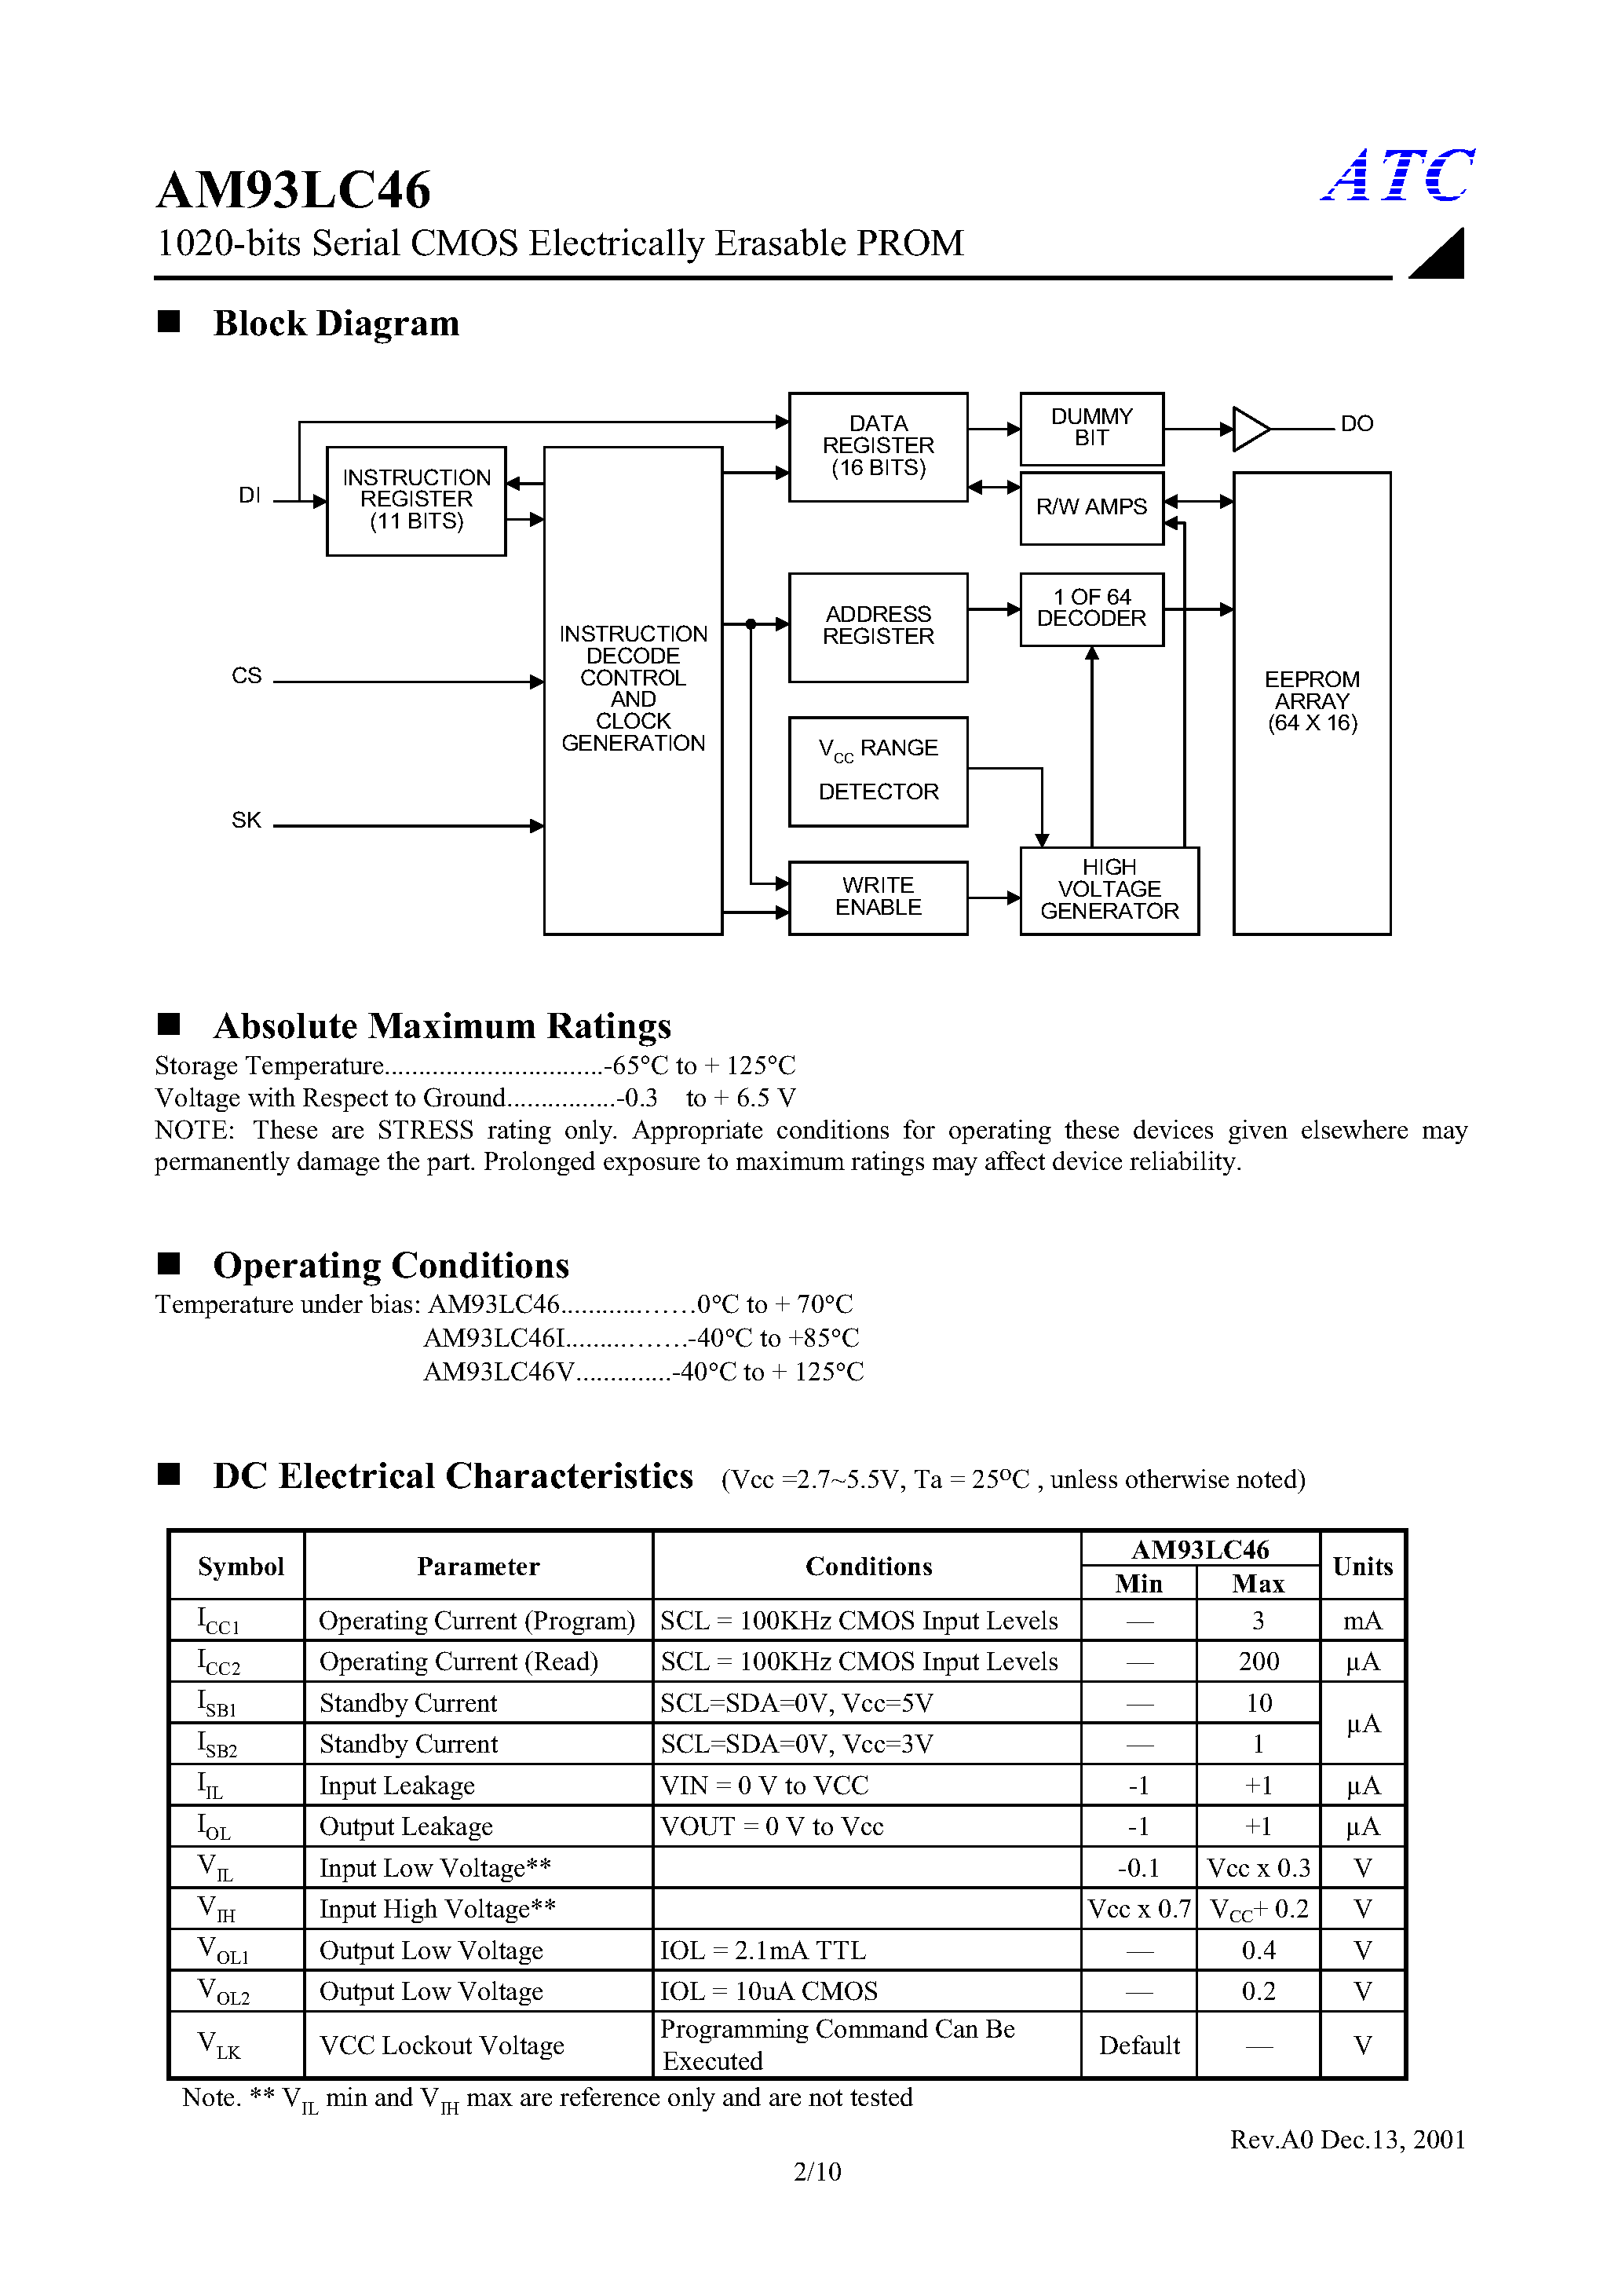 Datasheet AM93LC46IS8A - 1024-bits Serial Electrically Erasable PROM page 2